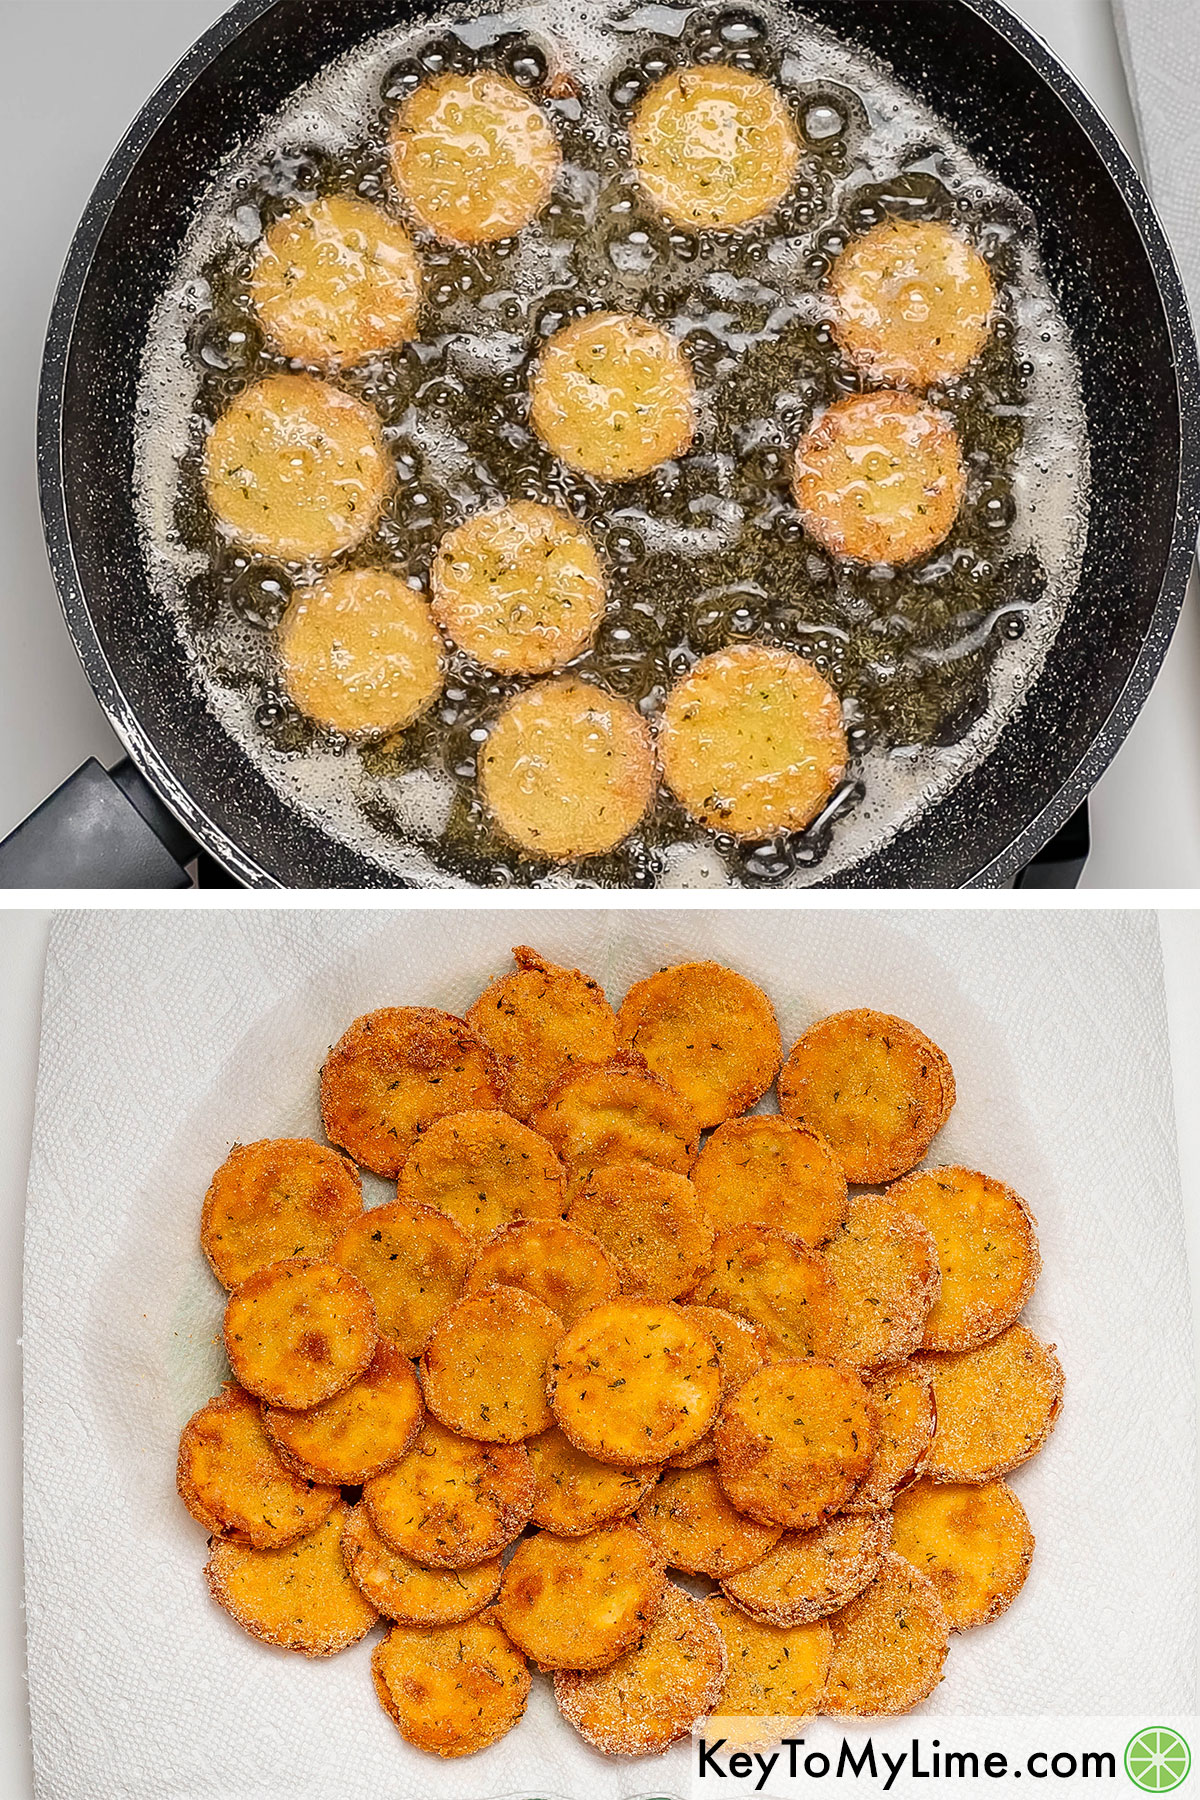 Adding and frying squash slices in hot vegetable oil in a skillet, and then transferring to a plate.